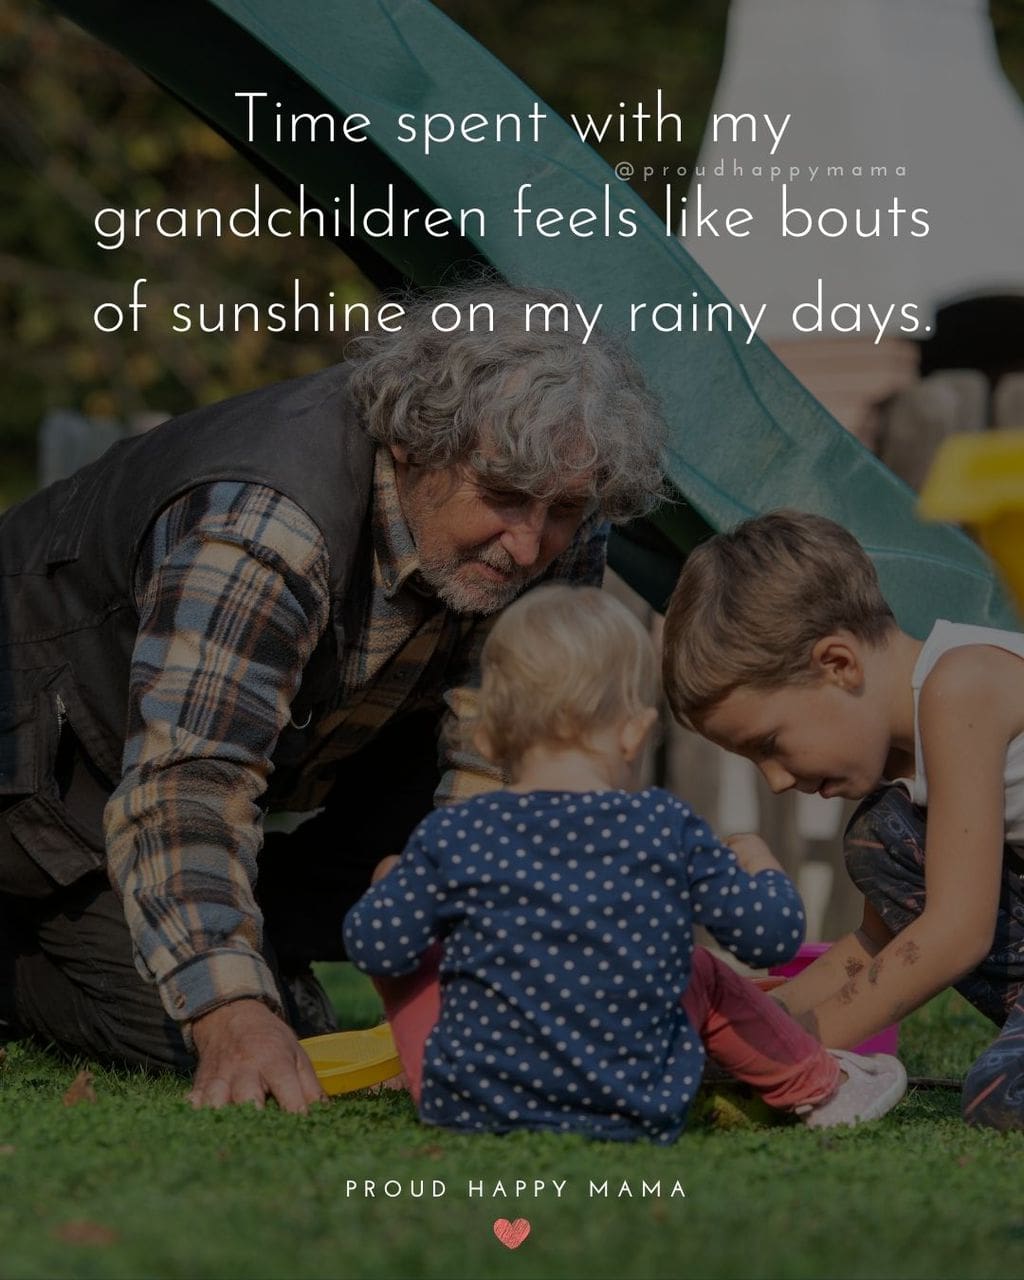 Quotes for Grandchildren - Time spent with my grandchildren feels like bouts of sunshine on my rainy days.